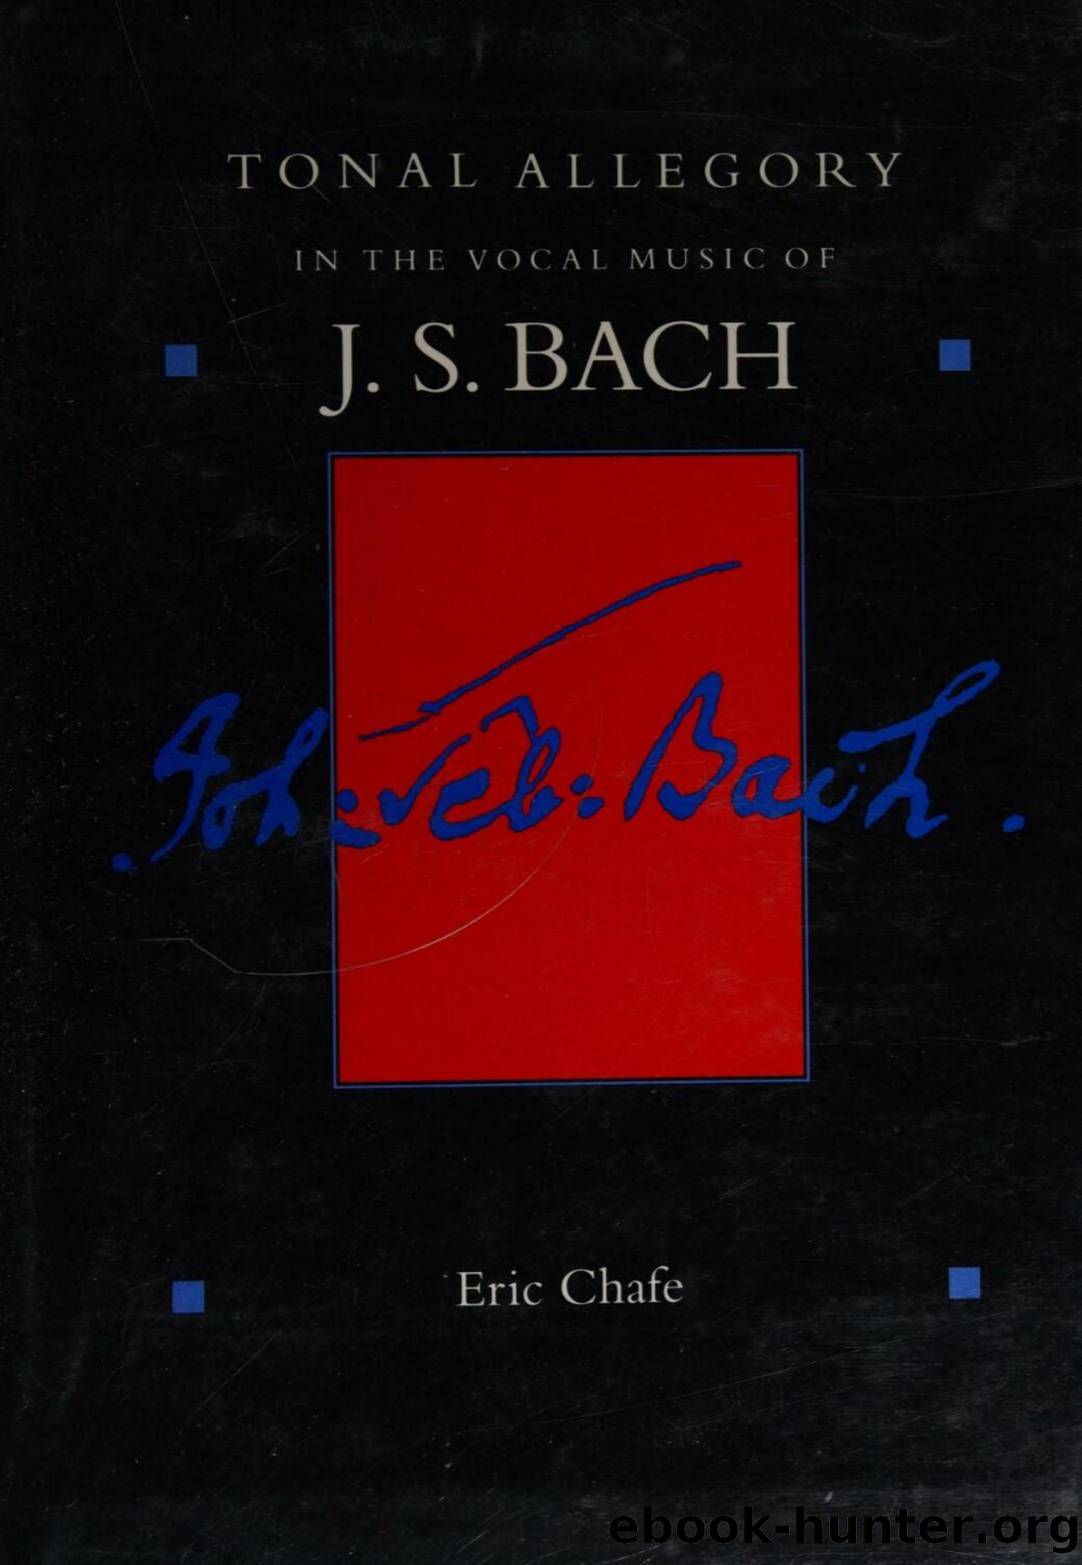 Tonal Allegory in the Vocal Music of J.S. Bach by Eric Chafe